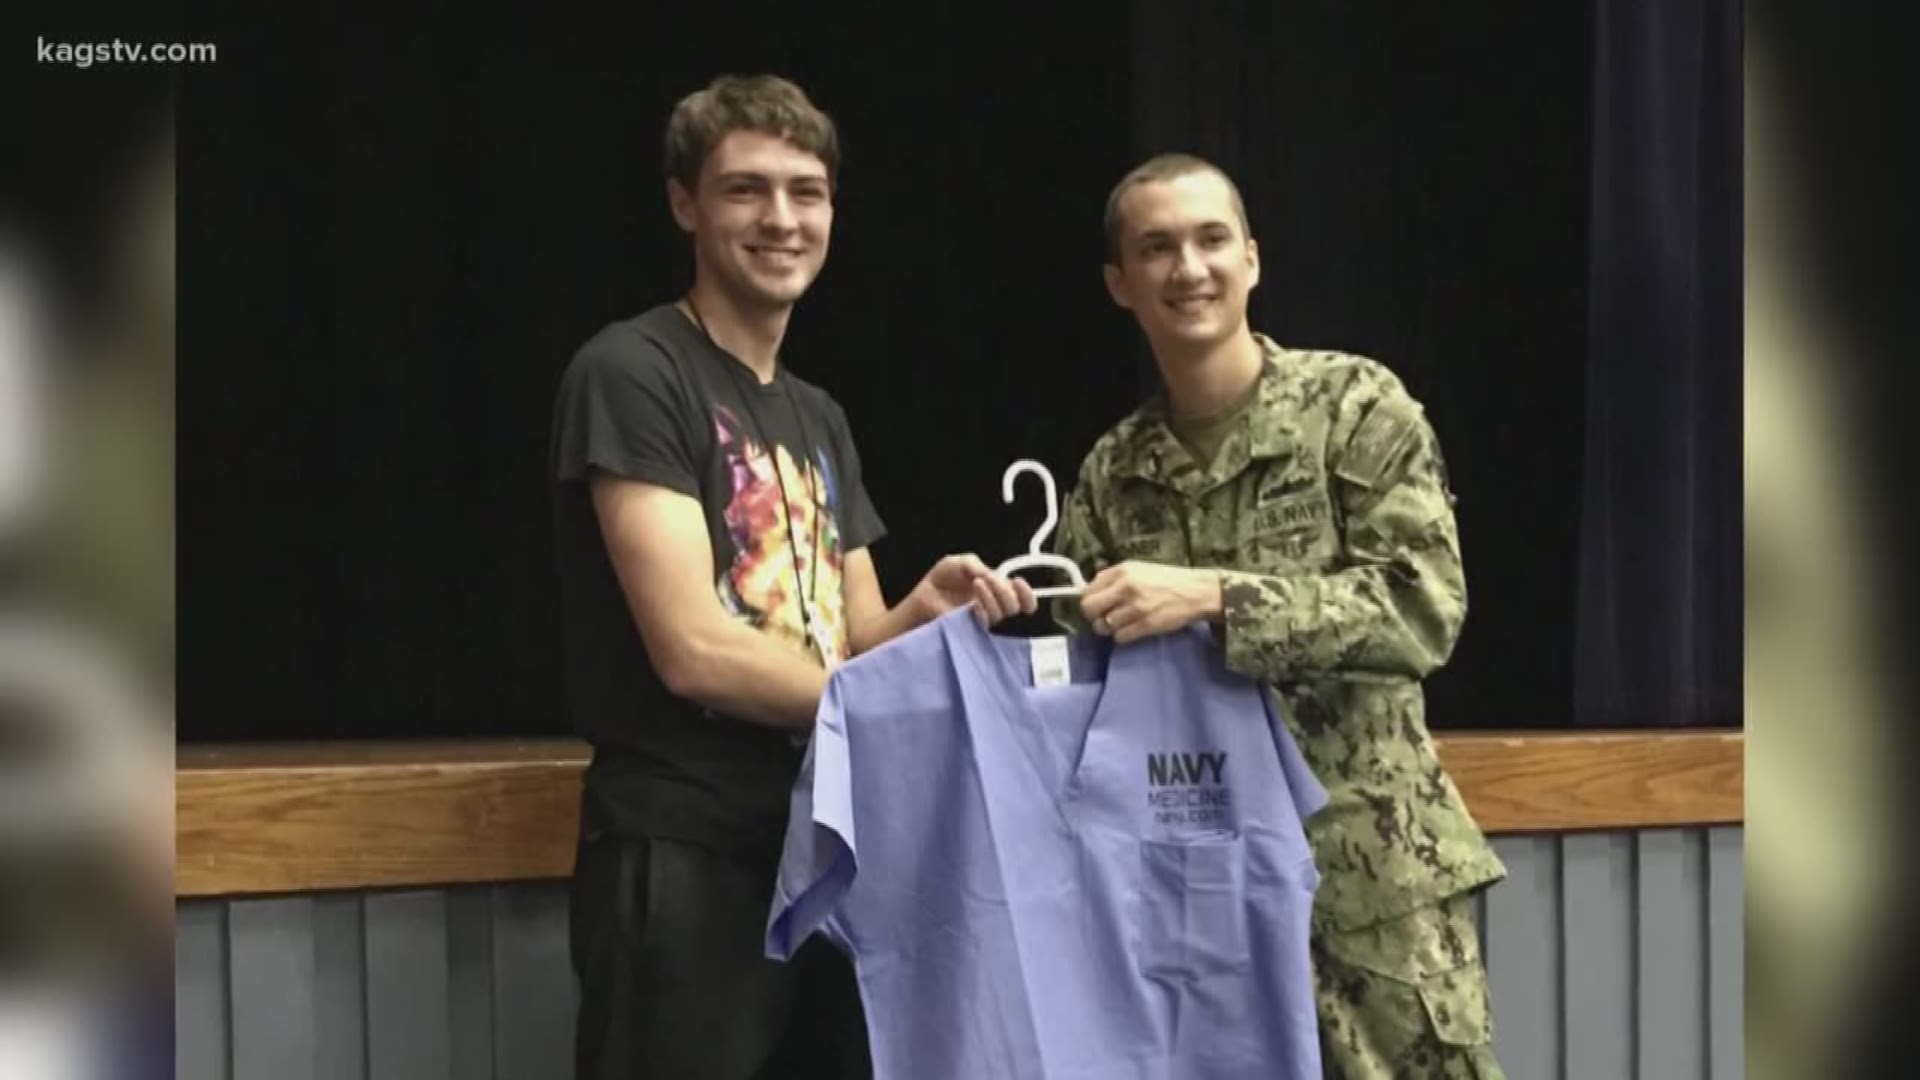 A student in the Hammond-Oliver Science Program at Bryan High School received his scrubs from the United States Navy and now he says he gets to continue his passion of helping others.